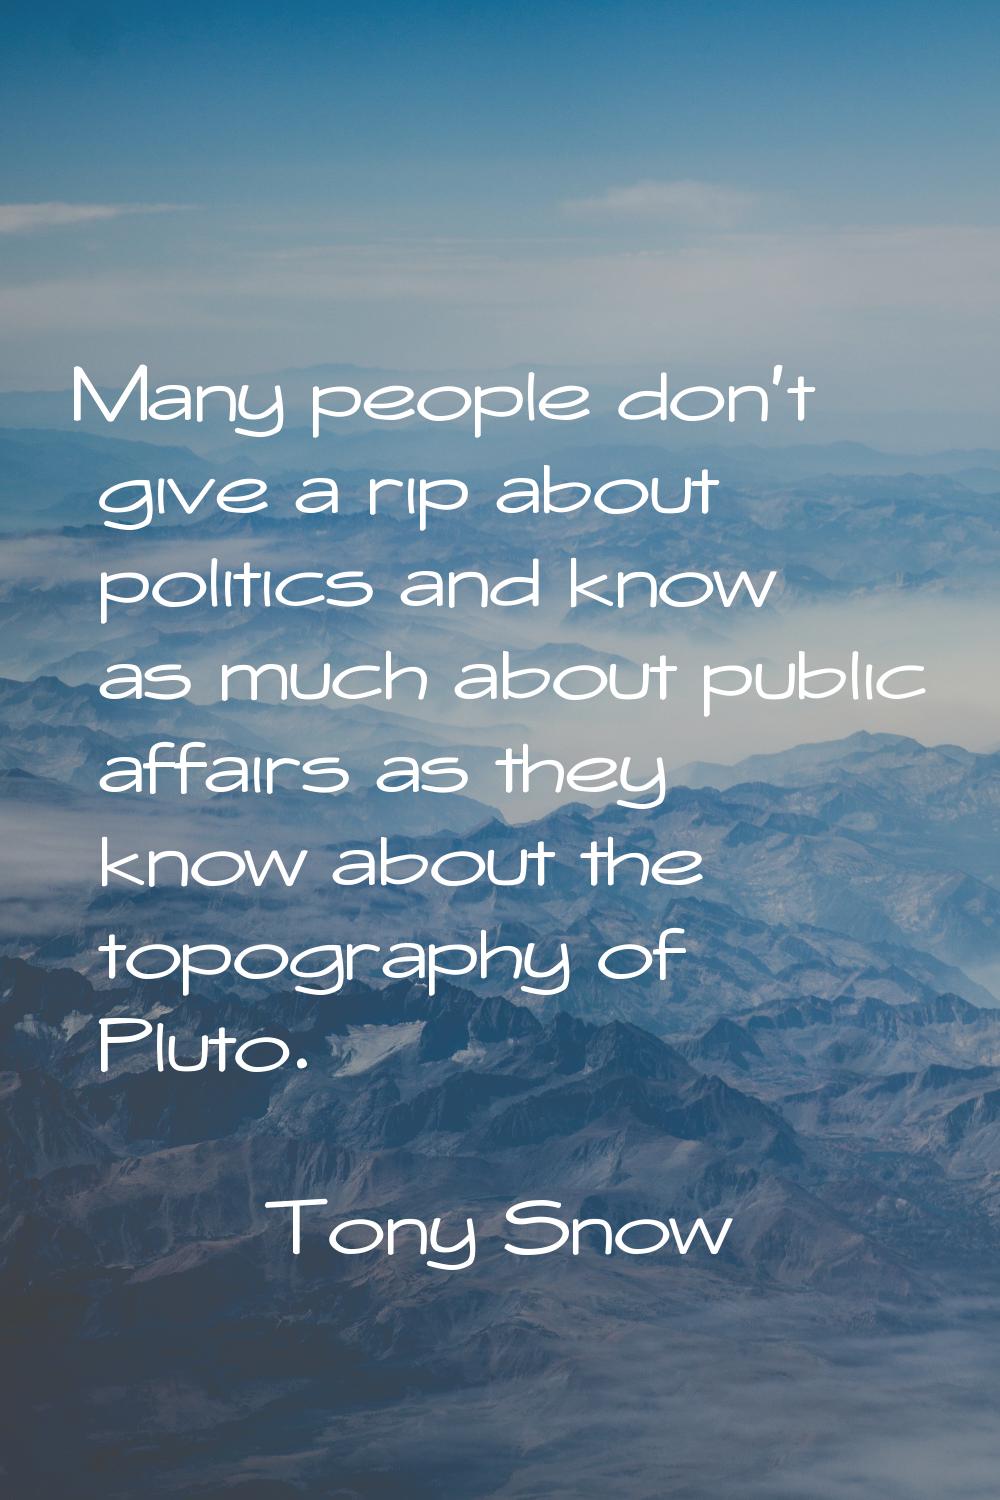 Many people don't give a rip about politics and know as much about public affairs as they know abou